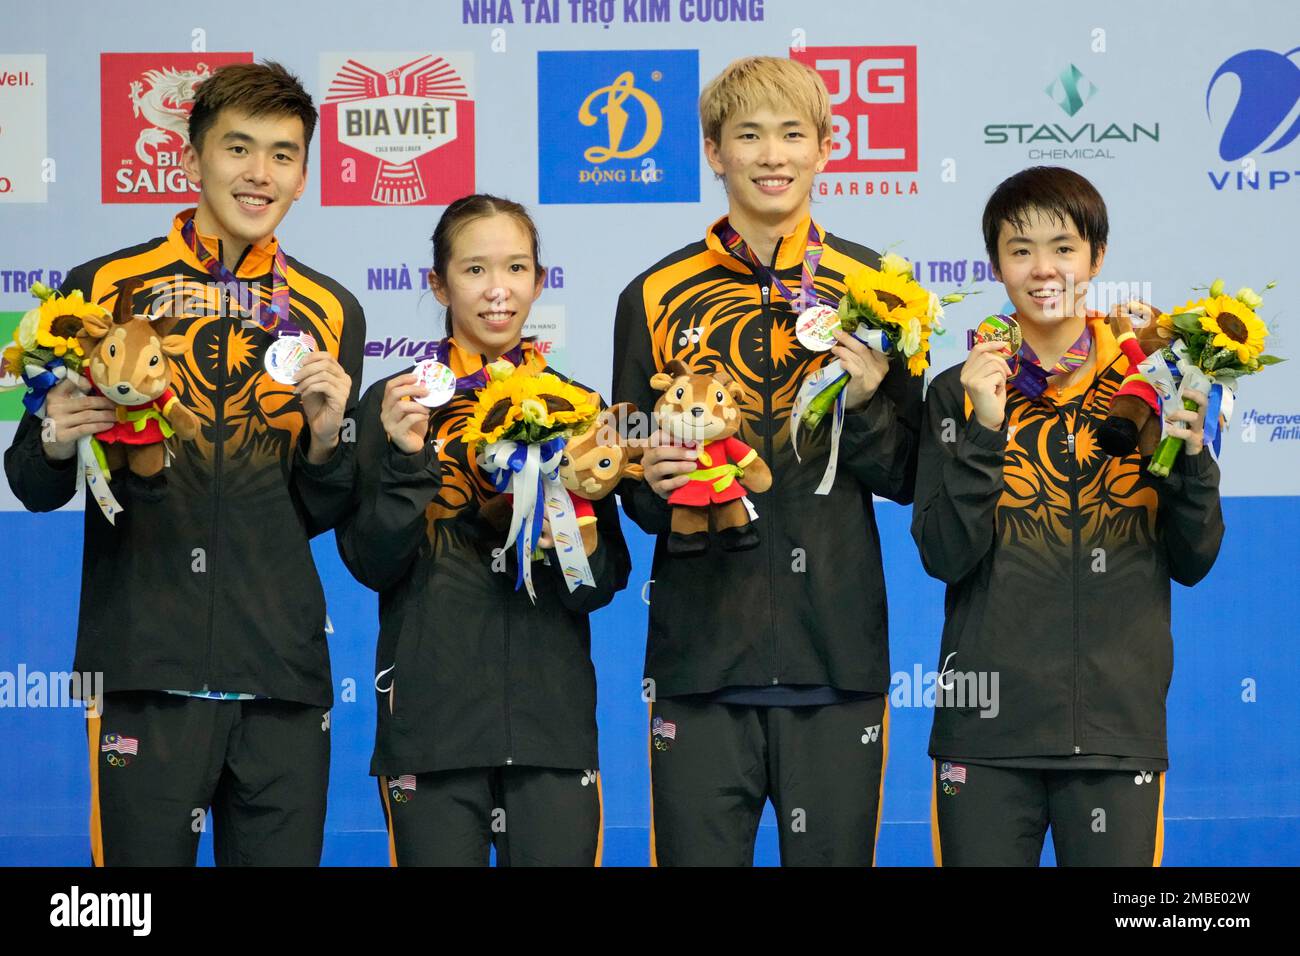 Gold medalists, Chen Tang Jie, second right, and Peck Yen Wei, right, celebrate with tsilver medalists Hoo Pang Ron, left and Cheah Yee See, all from Malaysia, during the victory ceremony for